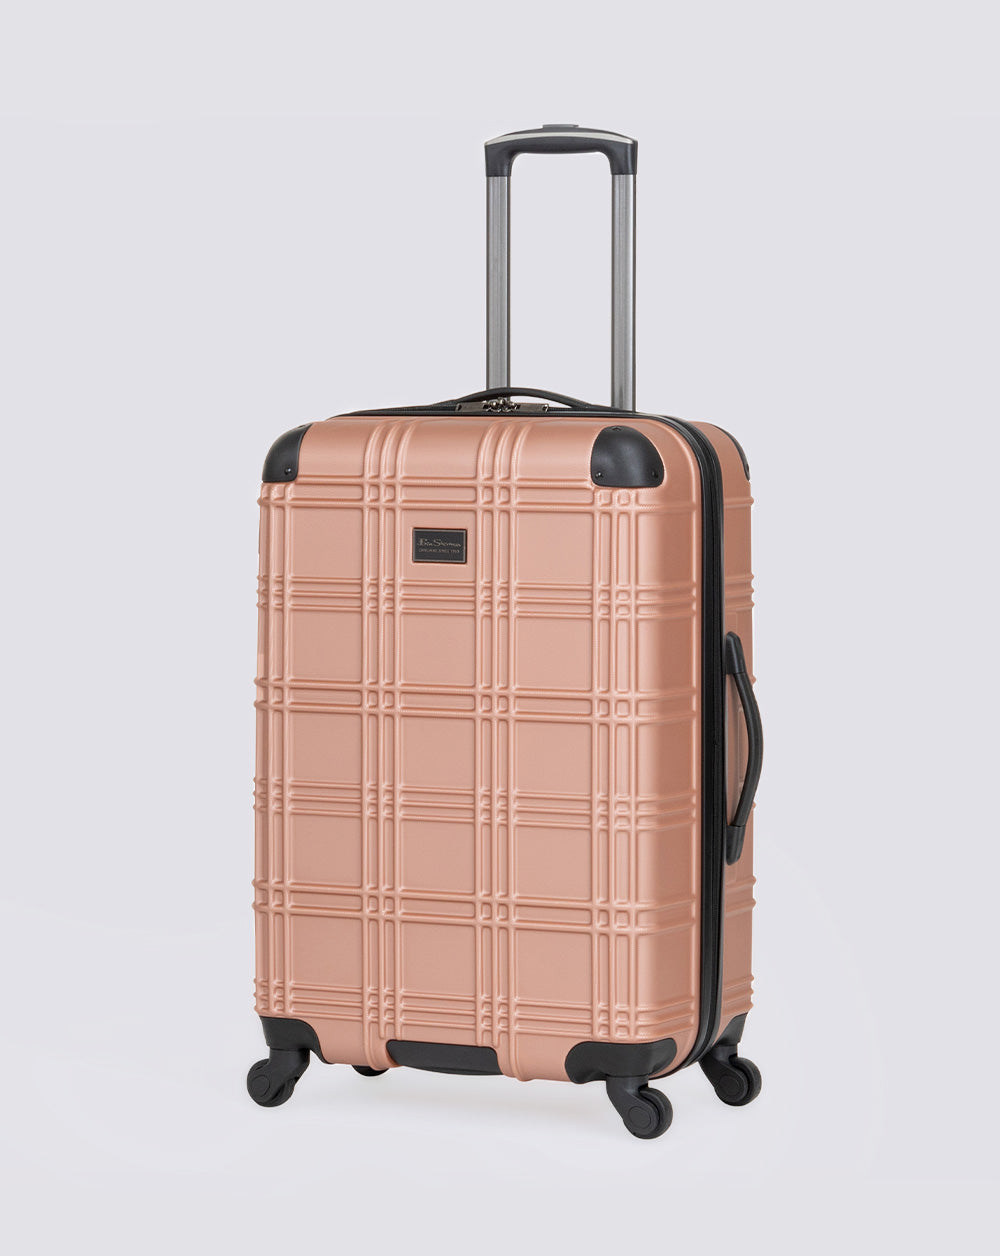 Luggage Sets & Travel Bags